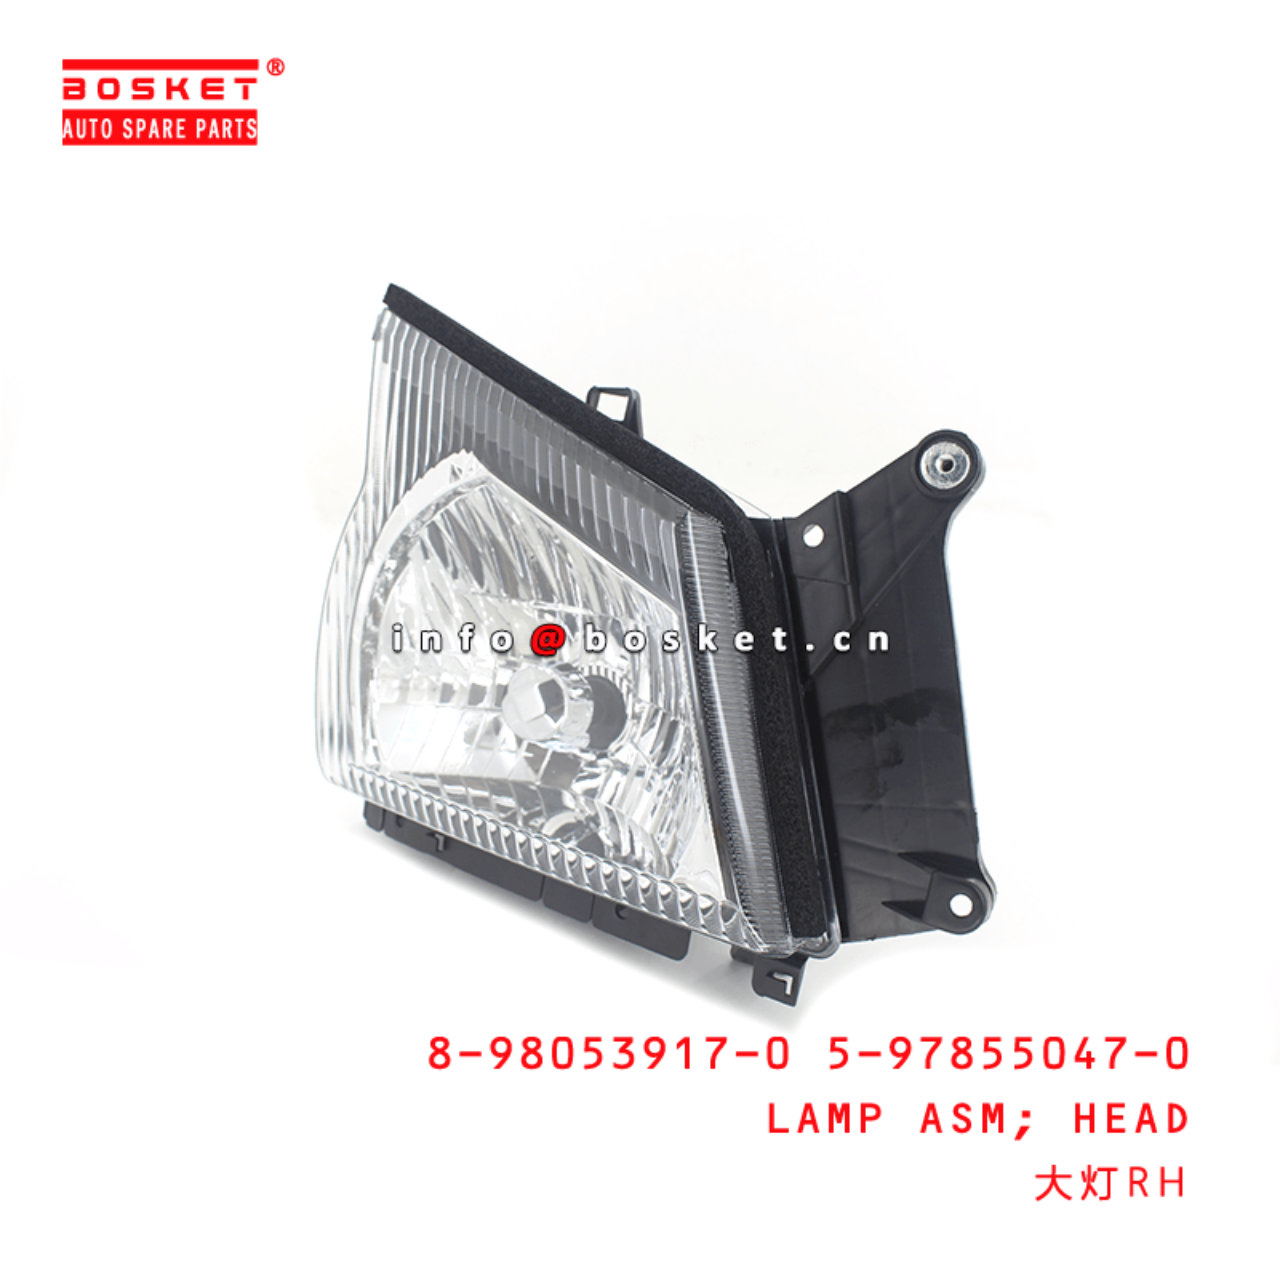 8-98053917-0 5-97855047-0 Head Lamp Assembly 8980539170 5978550470 Suitable for ISUZU 600P